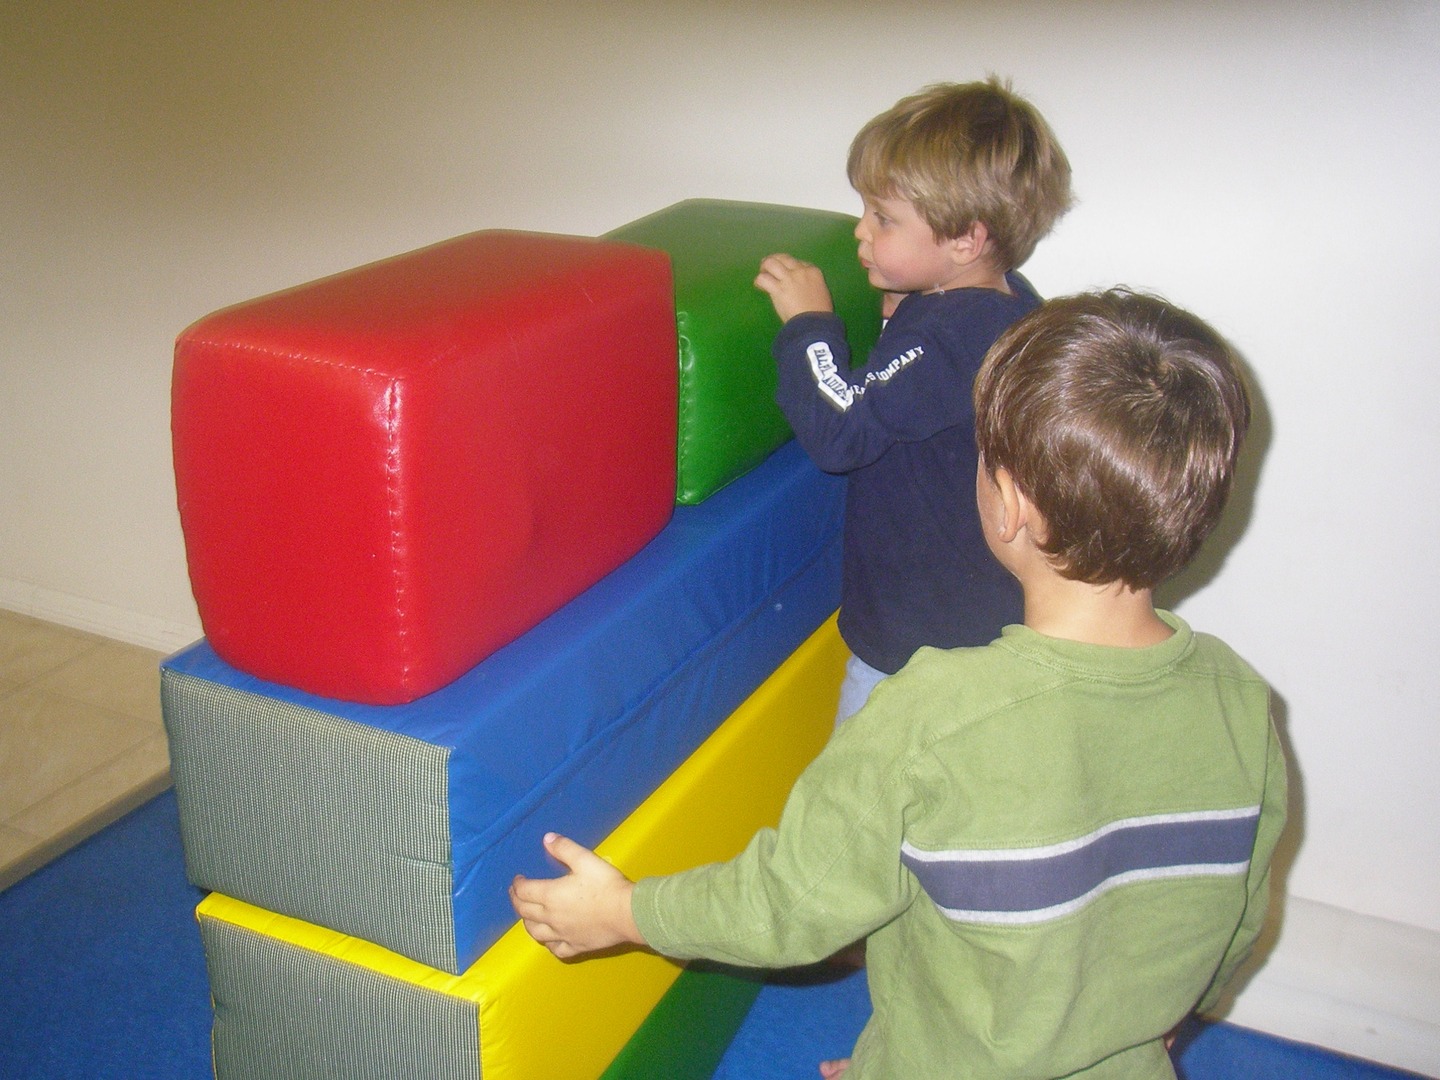 Two young boys playing with a large toy.